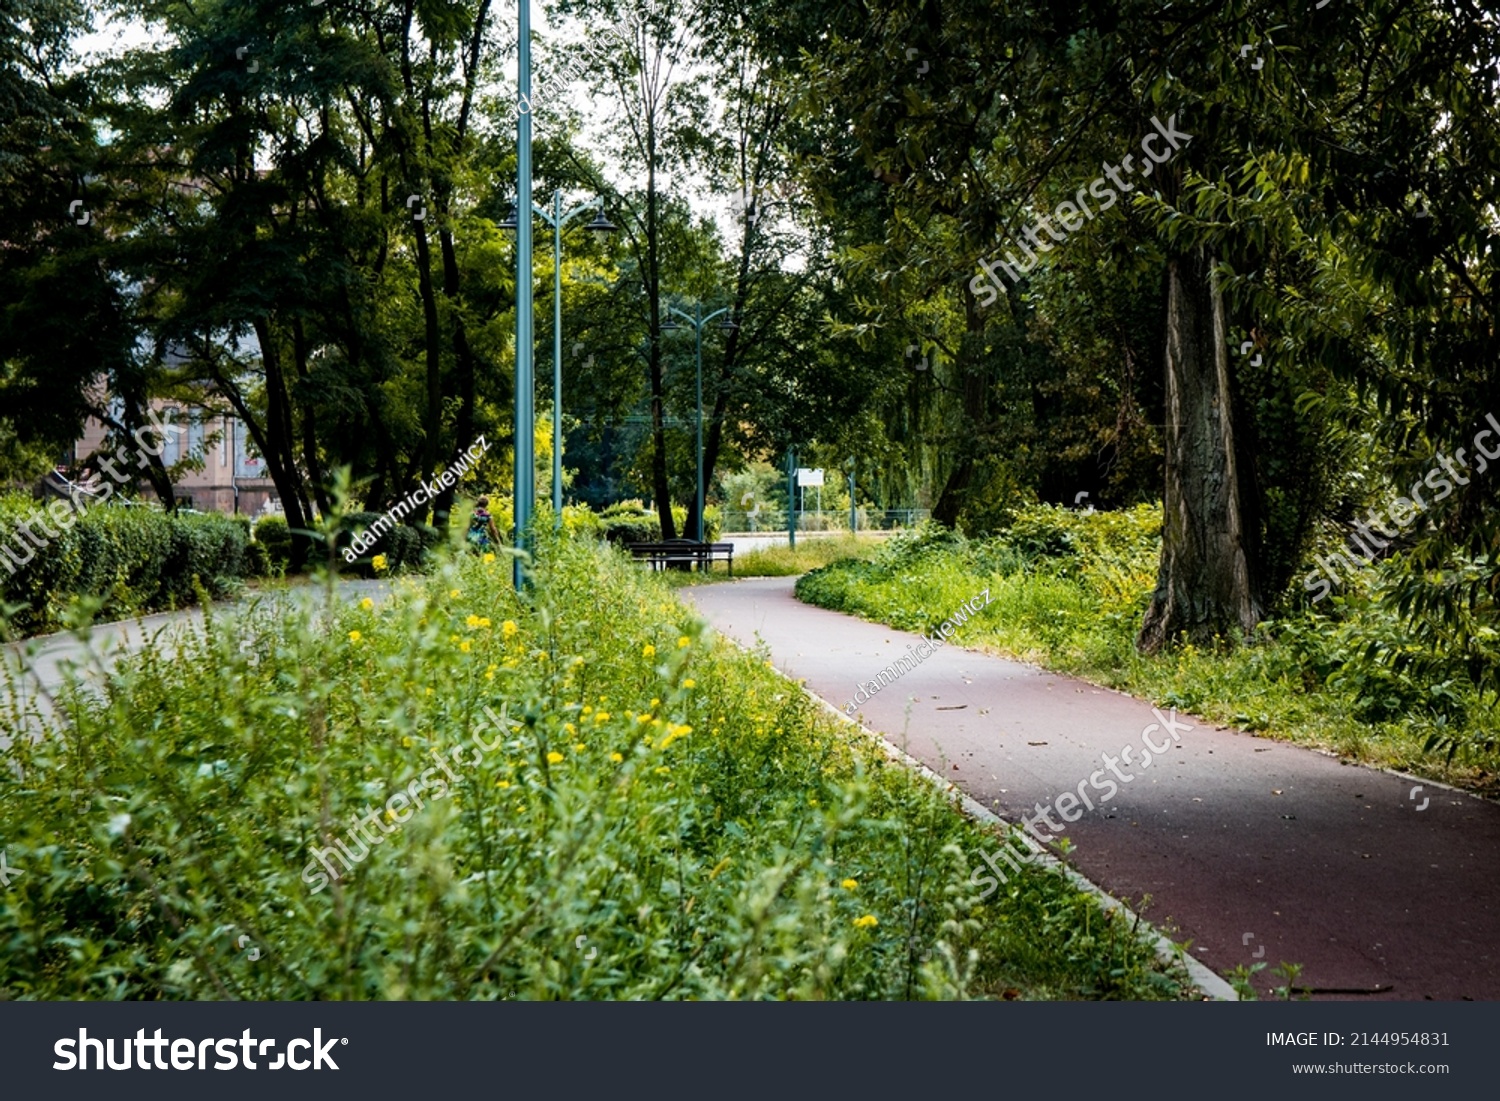 Asphalt footpath and bicycle path surrounded by lawn and trees at the city park #2144954831